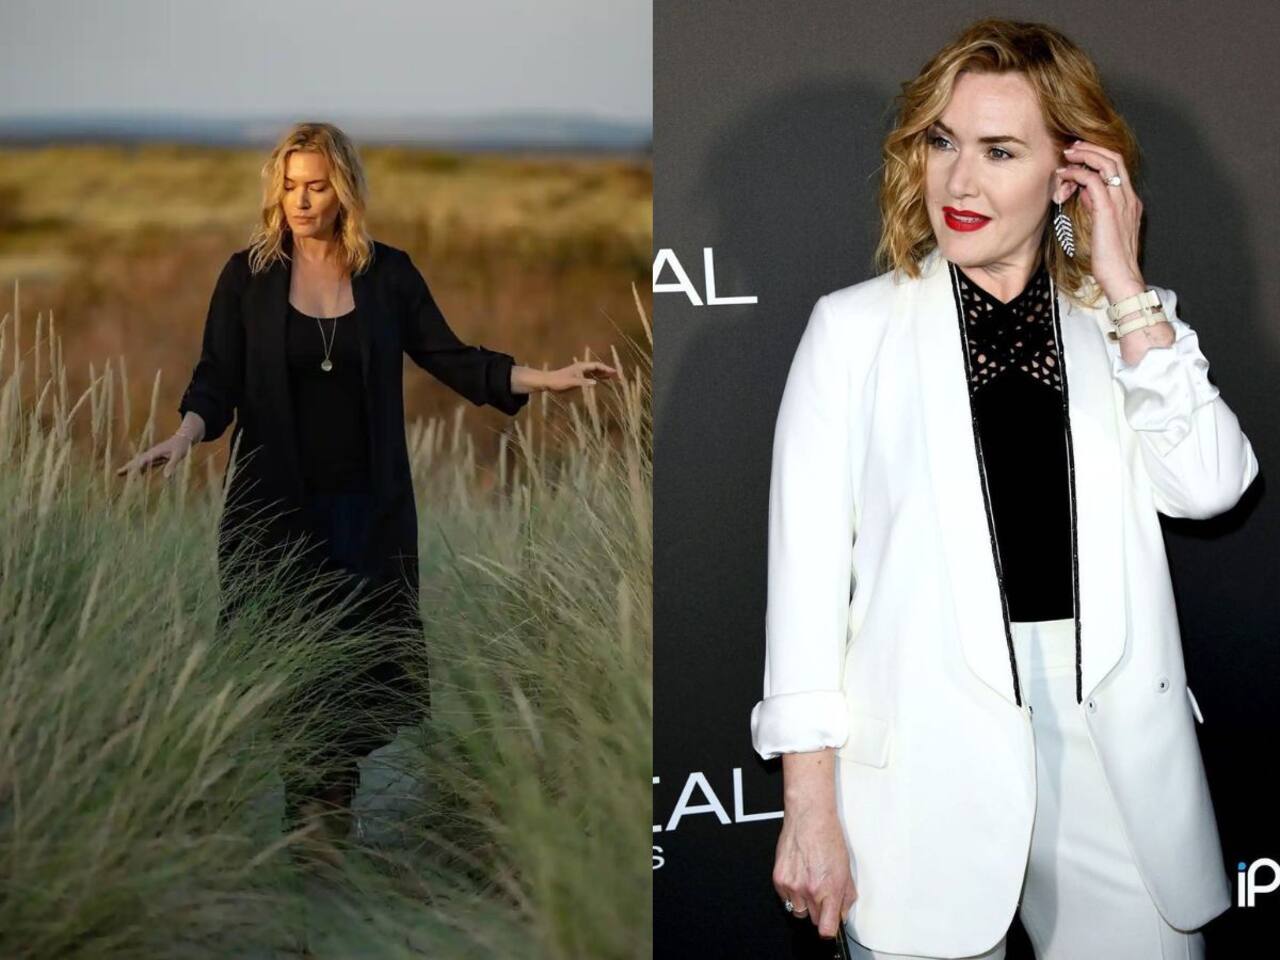 Titanic actress Kate Winslet goes from a pretty young belle to boss lady at 47